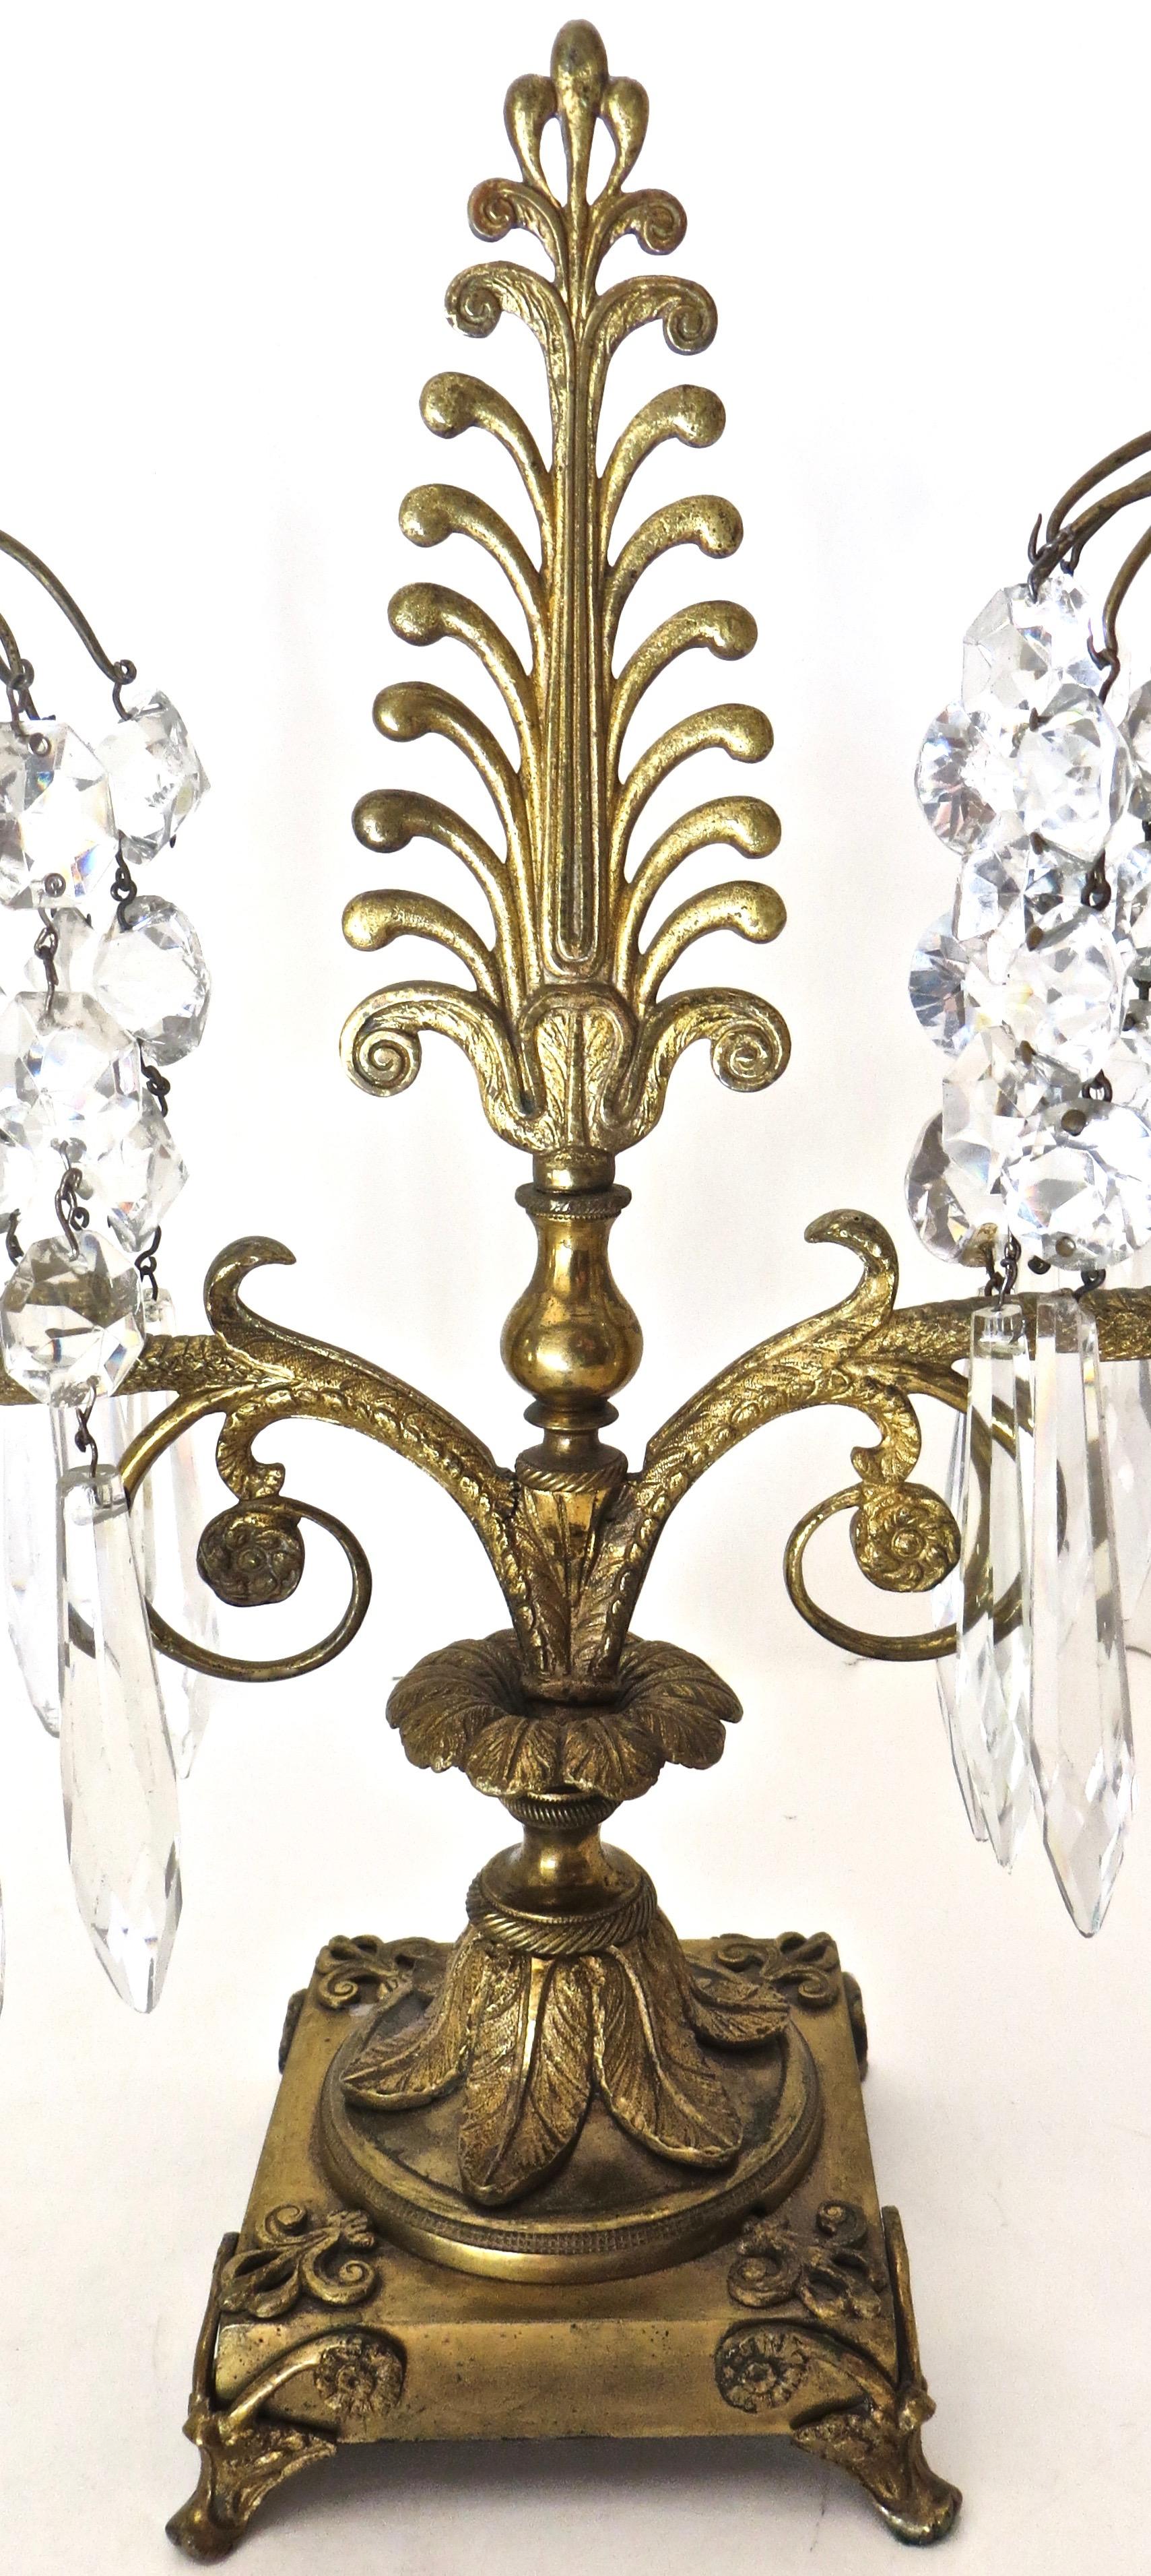 Pair of Regency Cut-Glass and Gilt-Metal Two Light Candelabras, circa 1815 For Sale 1